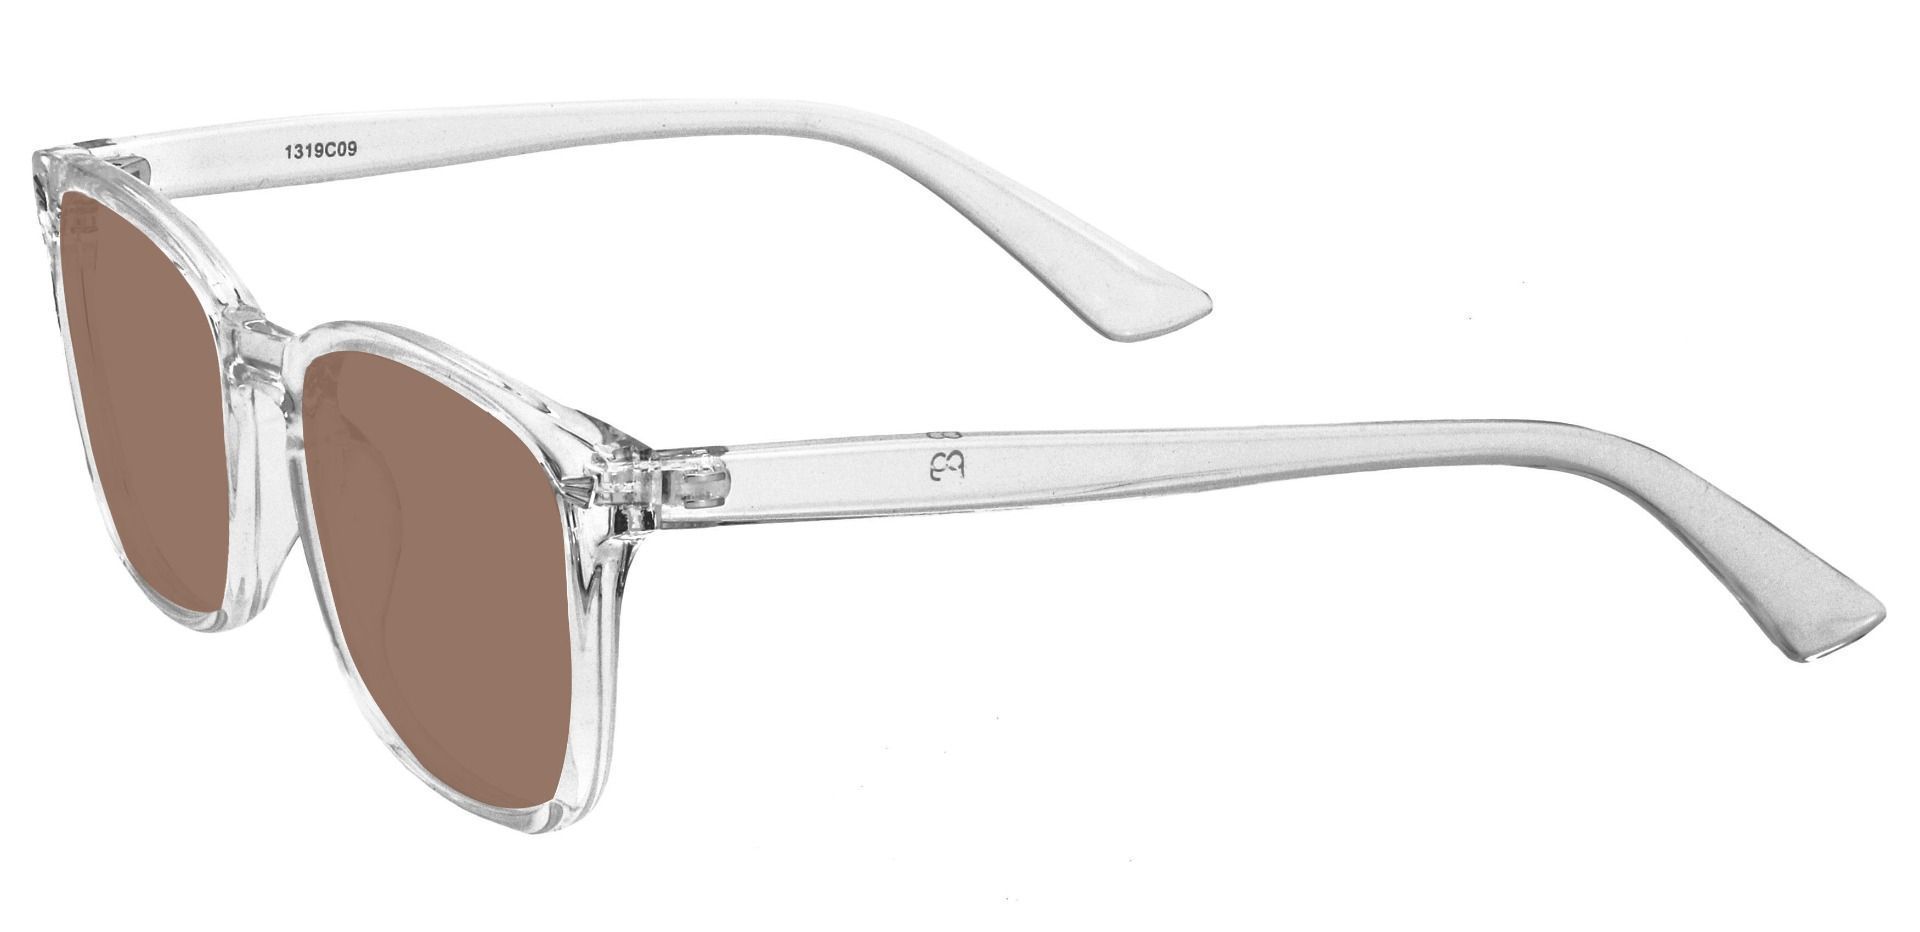 Rogan Square Reading Sunglasses - Clear Frame With Brown Lenses